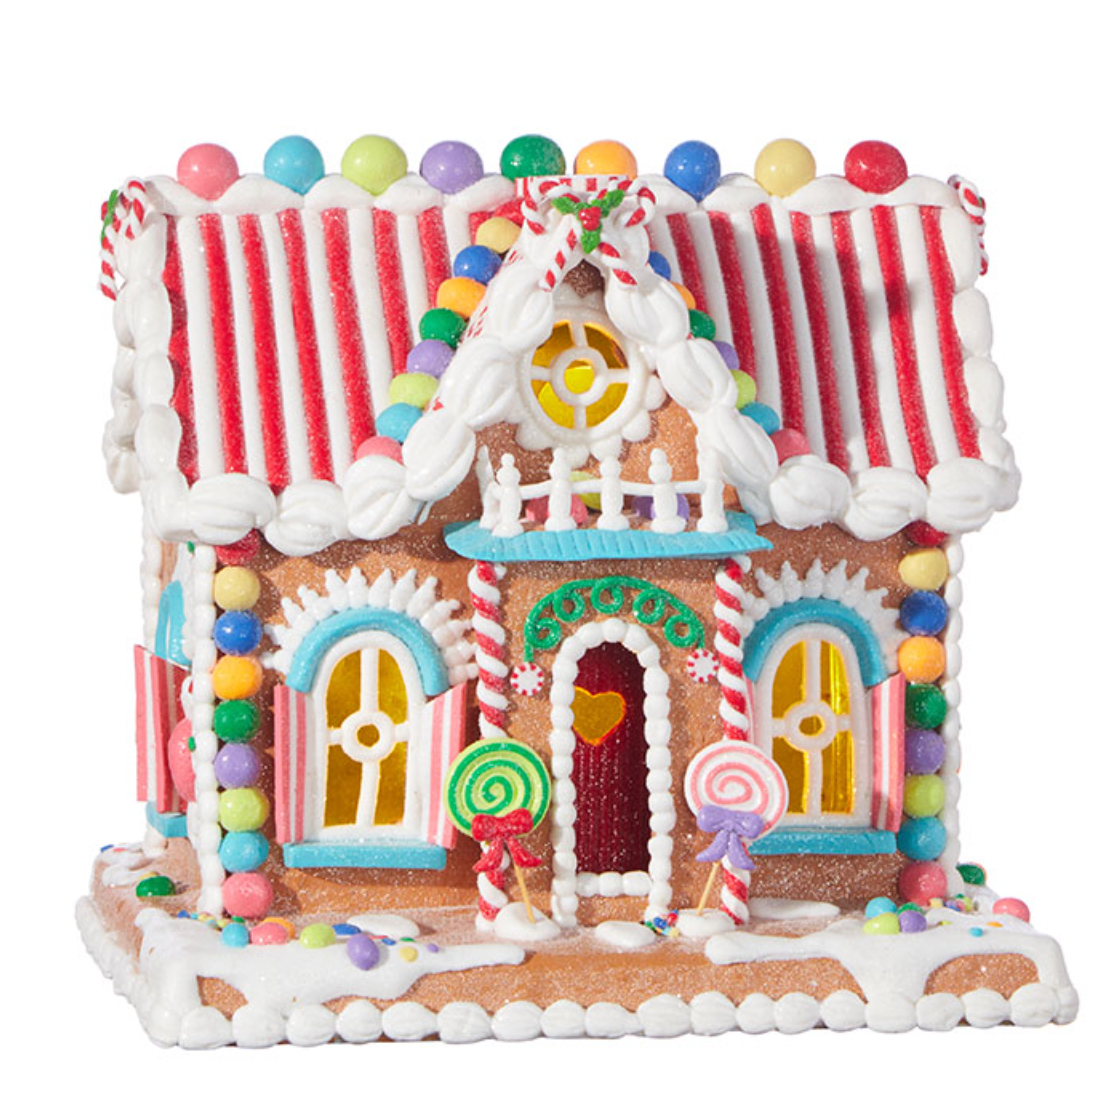 Lighted Gingerbread Candy House